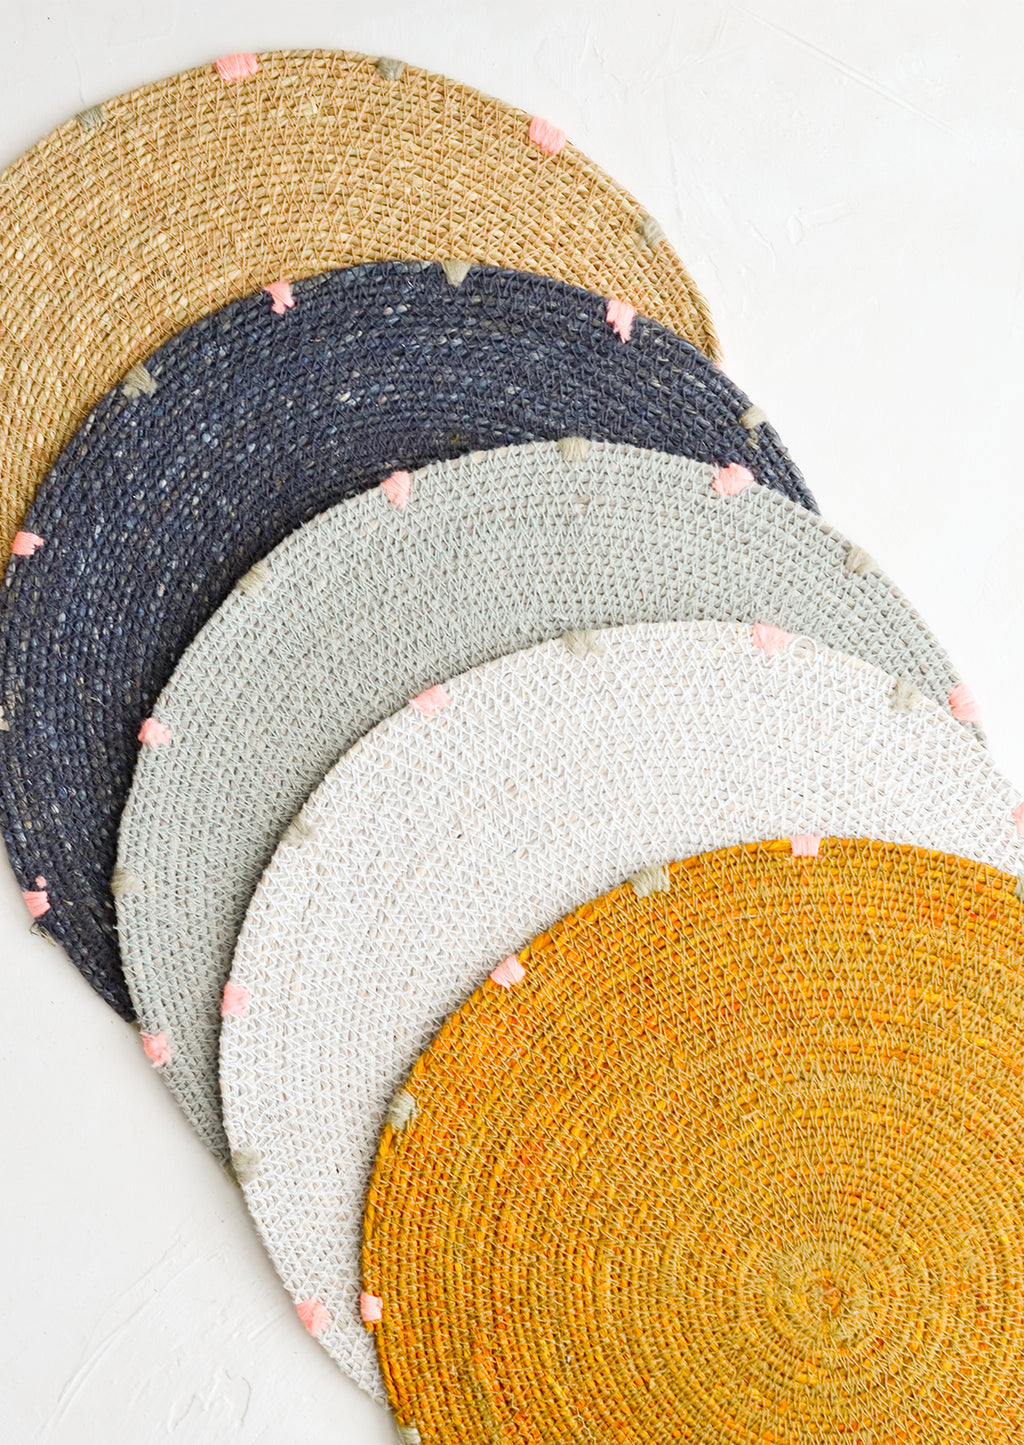 7: Five round seagrass placemats in assorted colors.